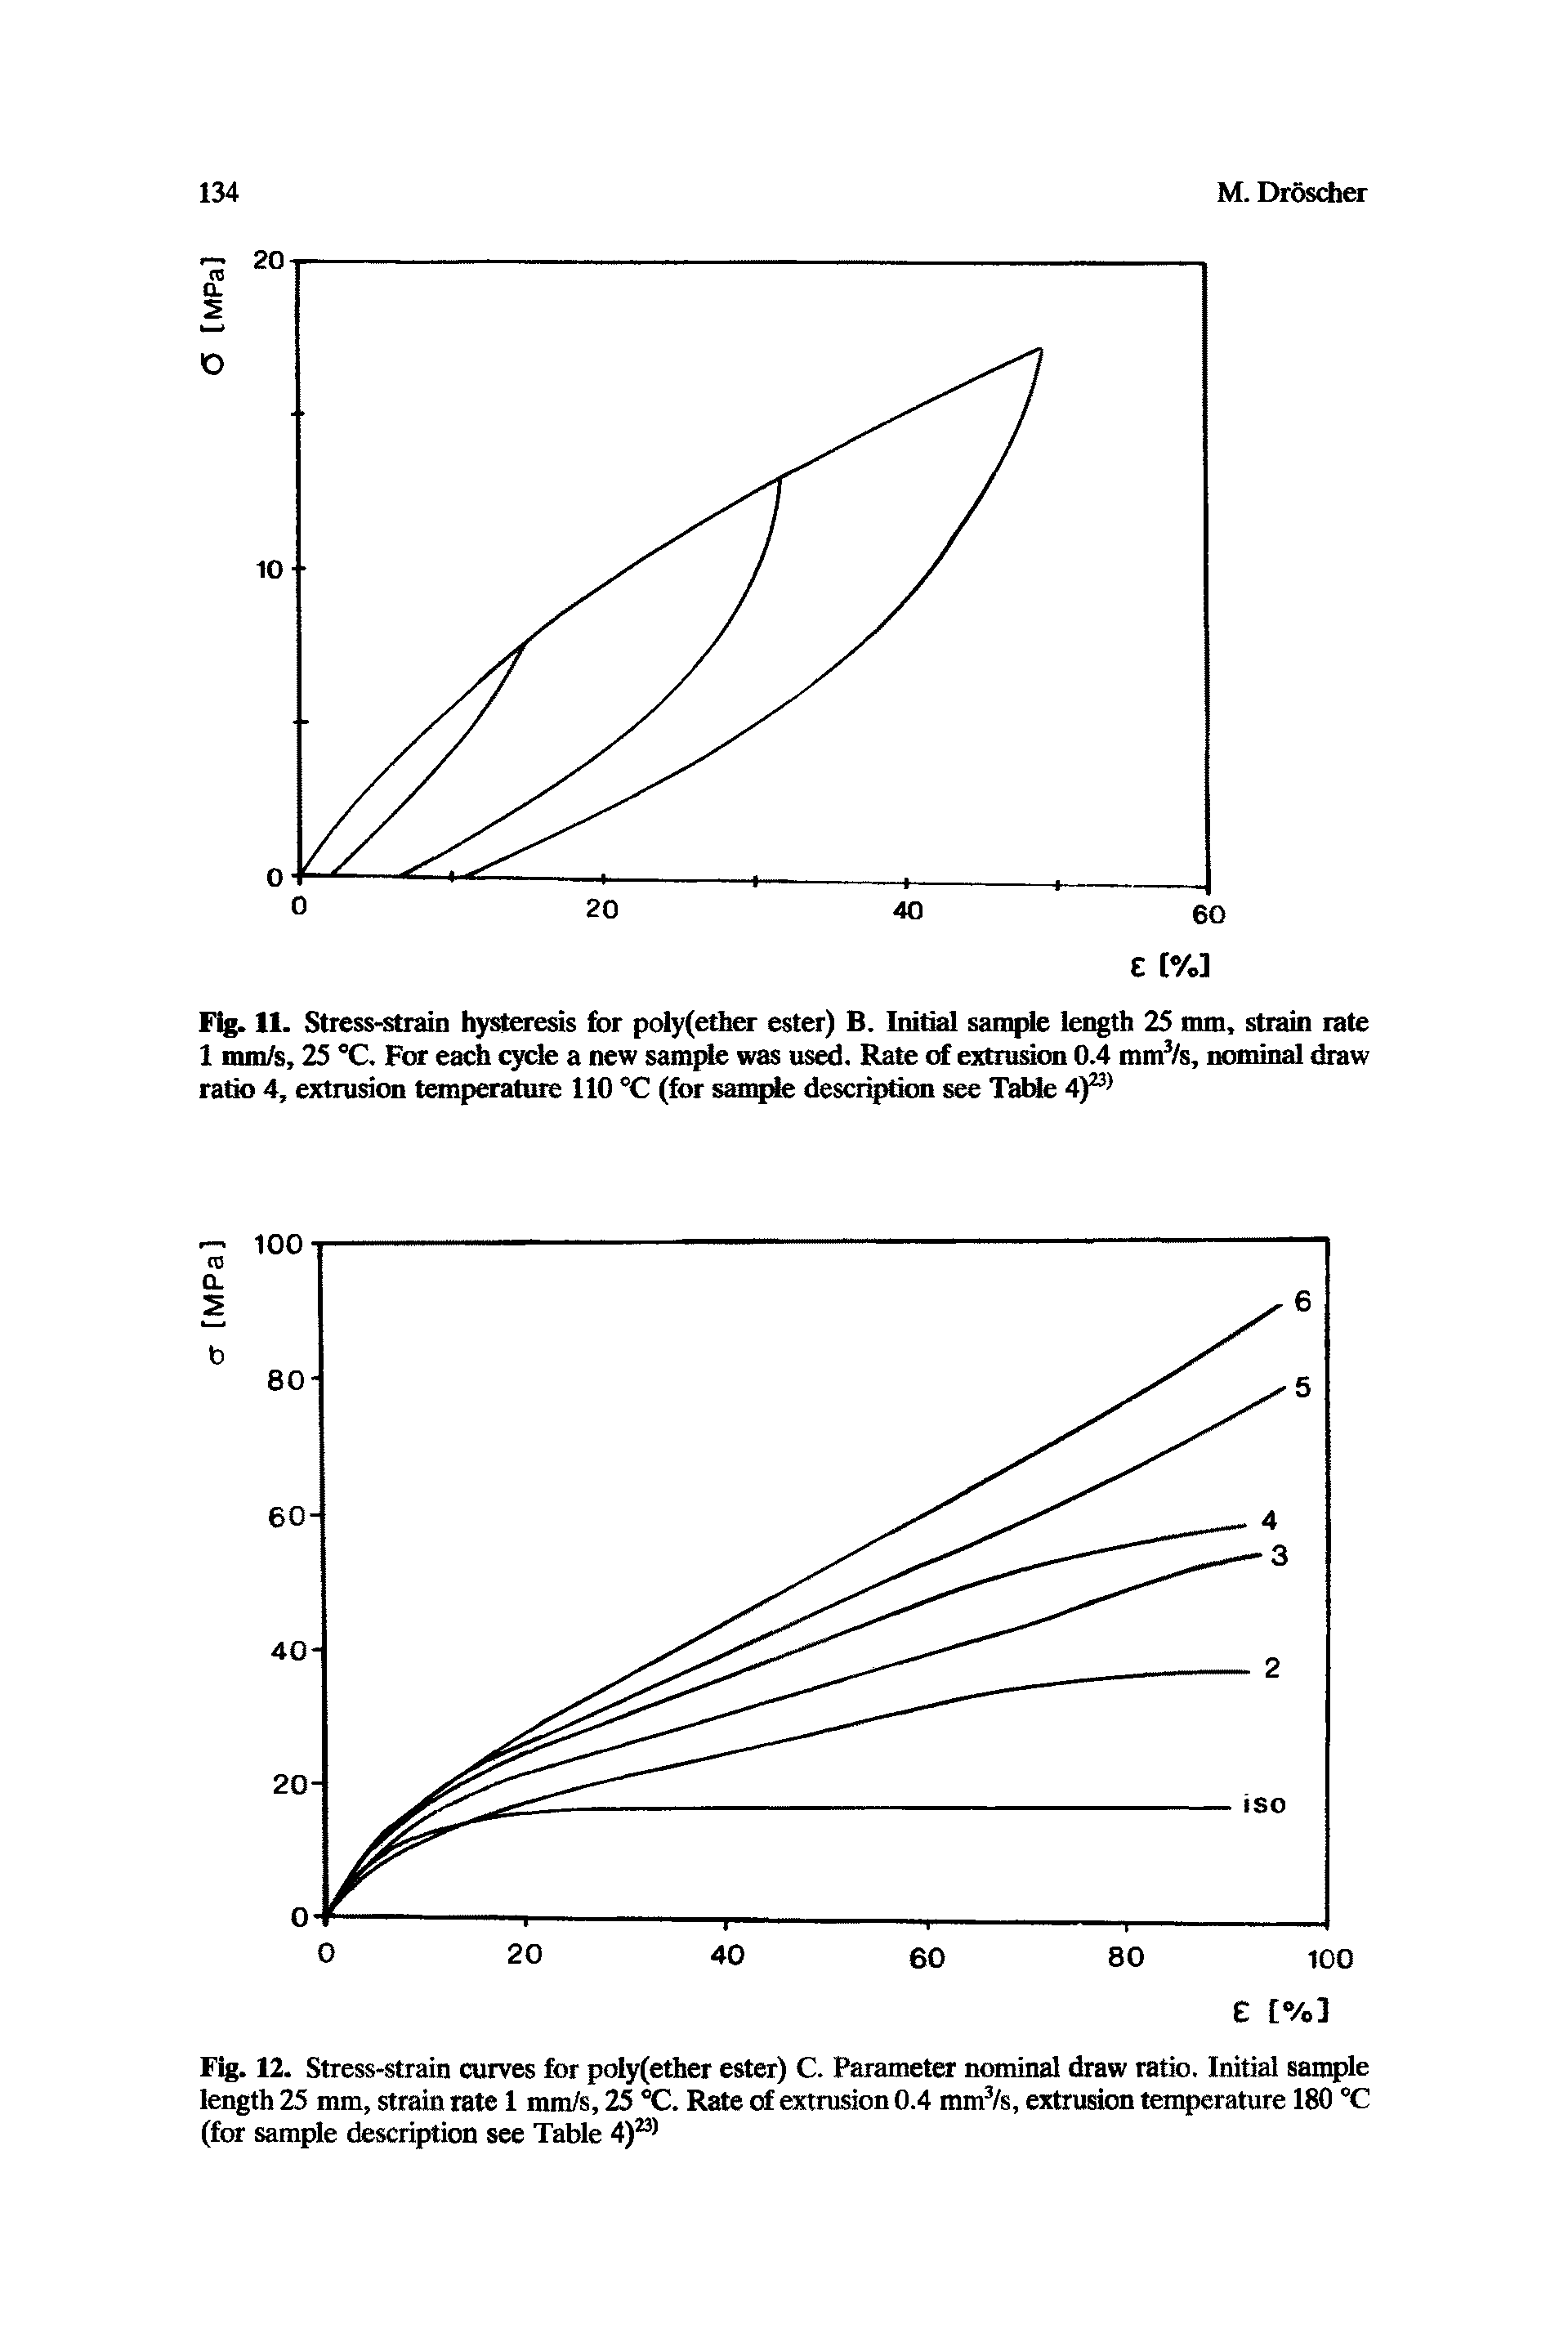 Fig. 12. Stress-strain curves for poly(ether ester) C. Parameter nominal draw ratio. Initial sample length 25 mm, strain rate 1 mm/s, 25 °C. Rate of extrusion 0.4 mm /s, extrusion temperature 180 "C (for sample description see Table 4) ...